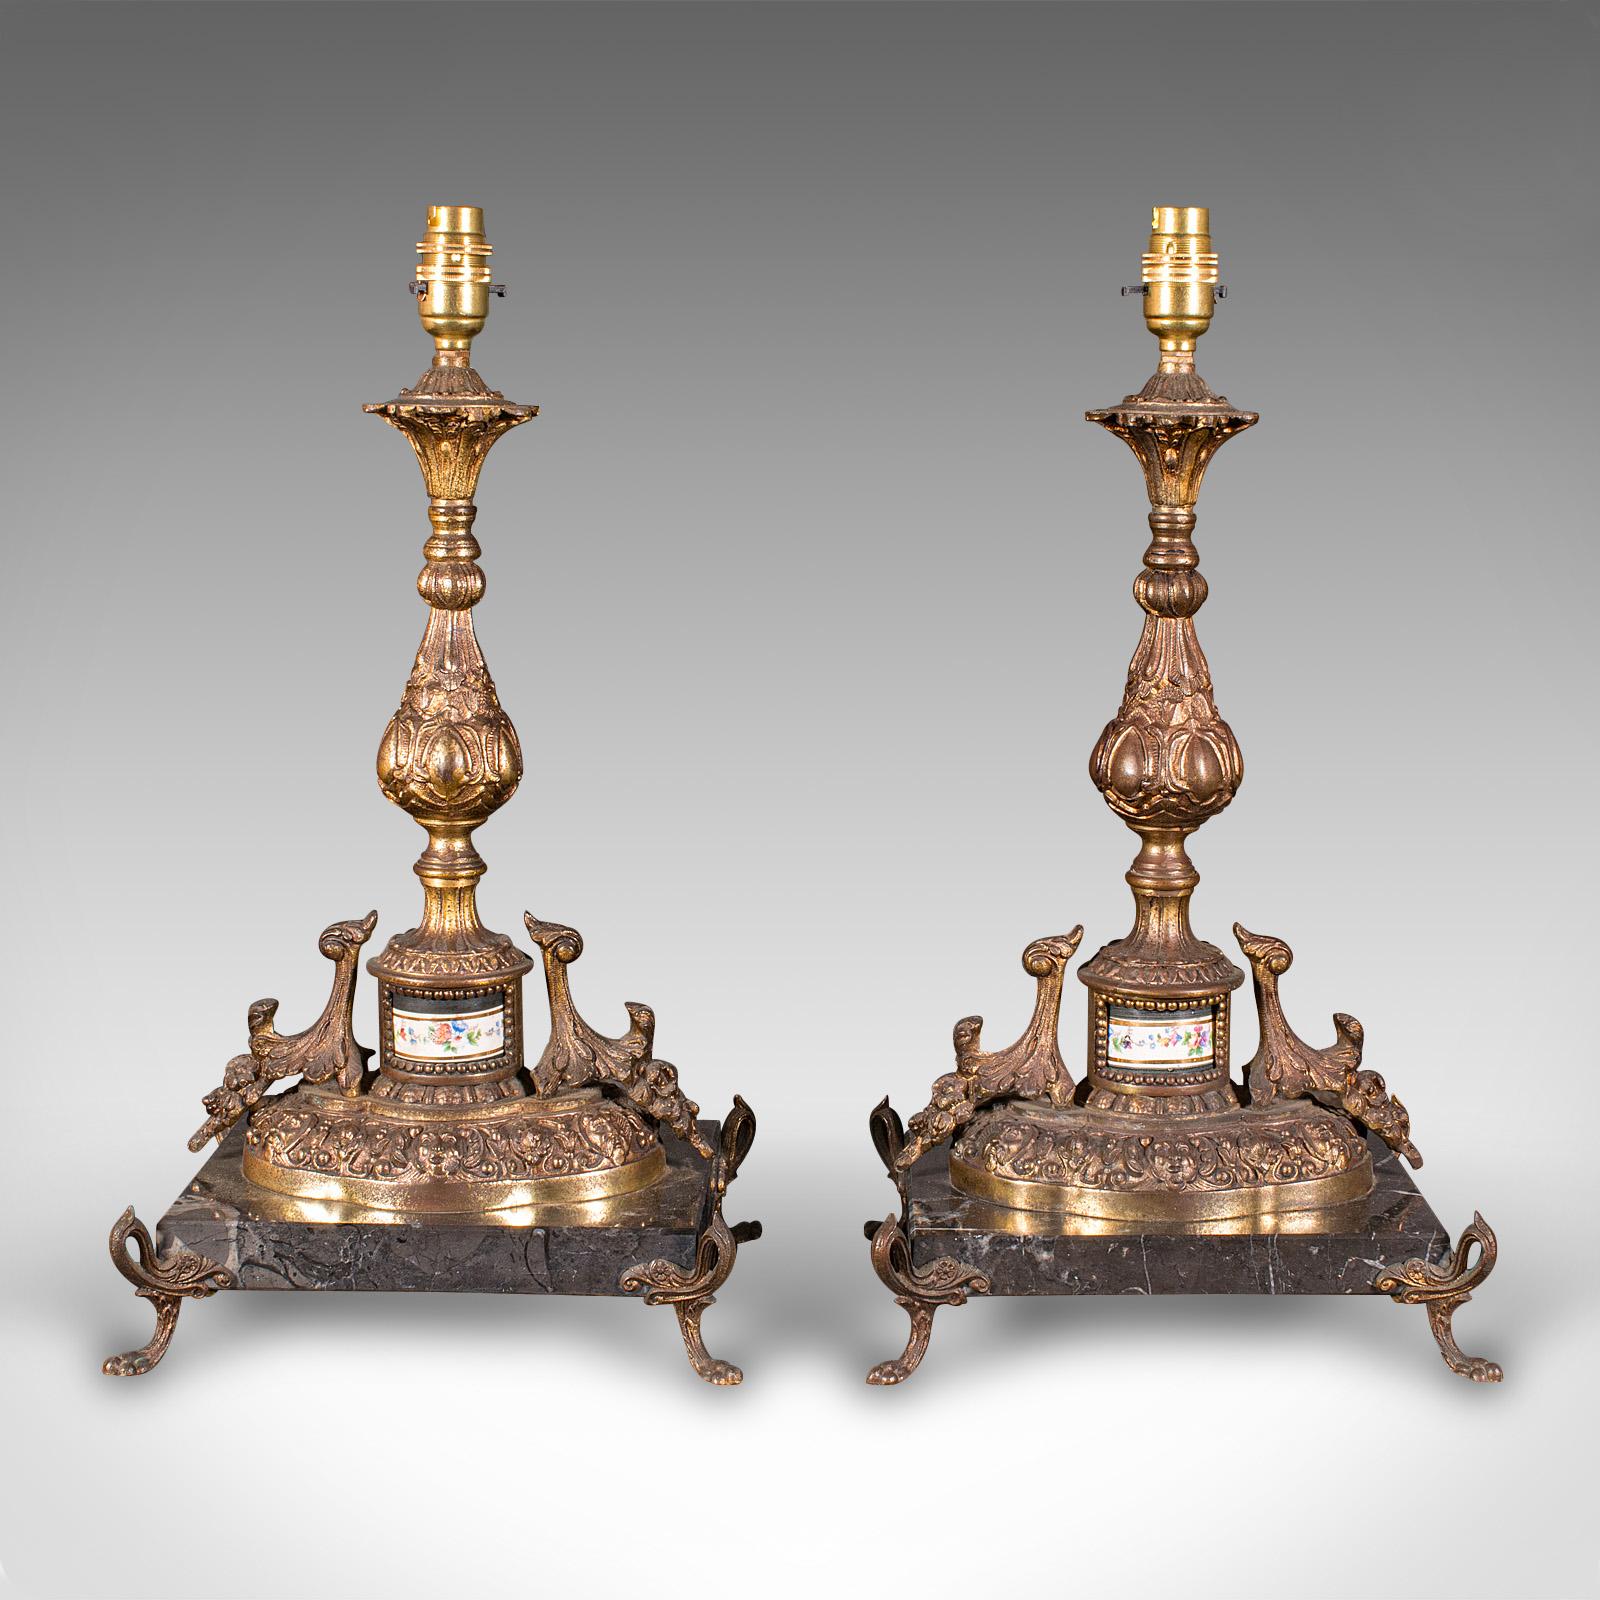 
This is a pair of antique lamp bases. A French, gilt metal and marble wired table light, dating to the Edwardian period, circa 1910.

Delightfully ornate lamp bases of substantial proportion
Displaying a desirable aged patina and in good order
Gilt